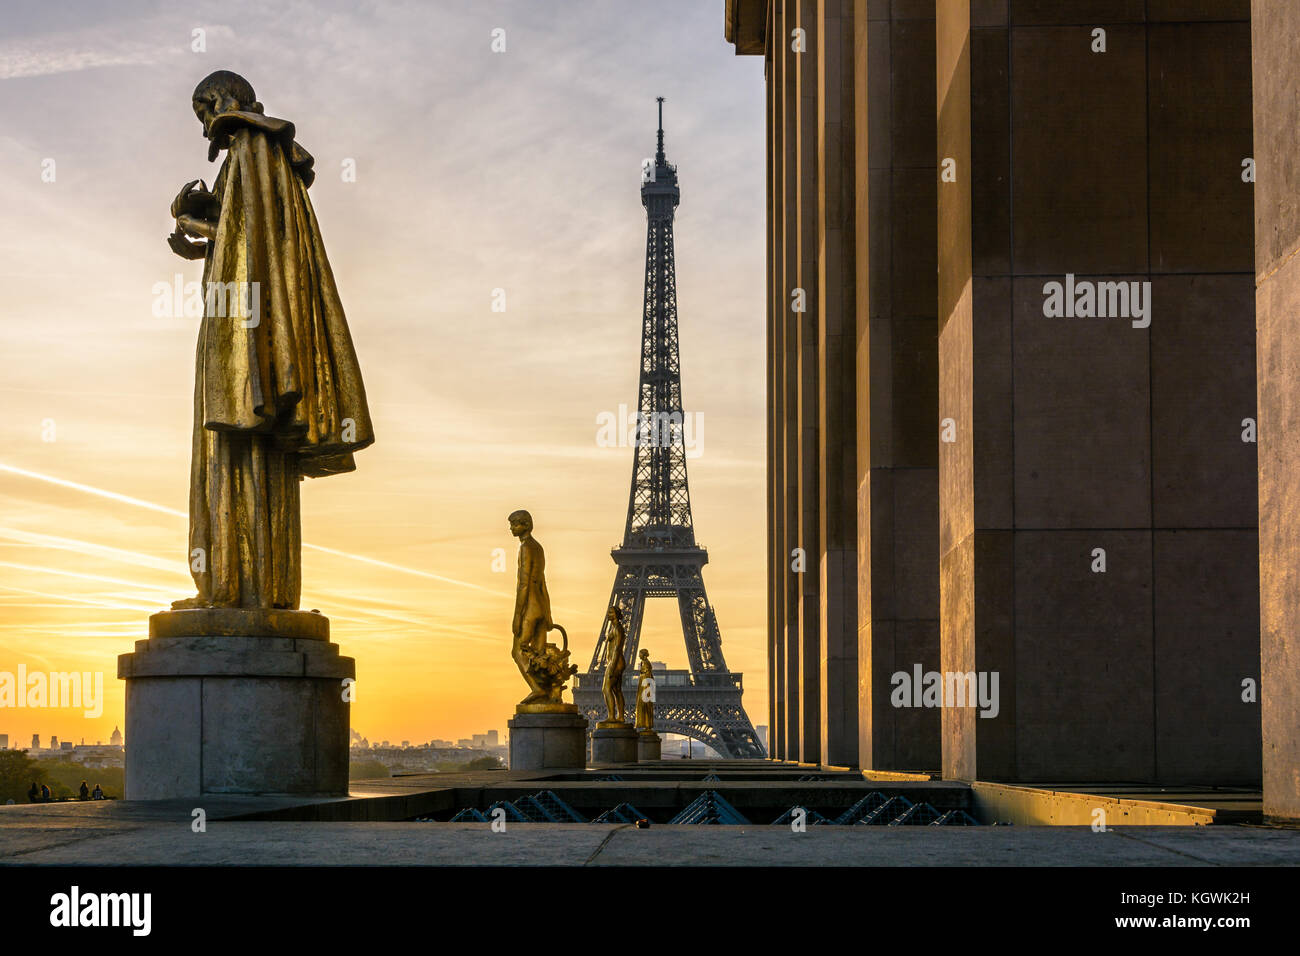 The rising sun illuminates the golden statues on the Trocadero esplanade while the Eiffel Tower stands out against an orange sky. Stock Photo